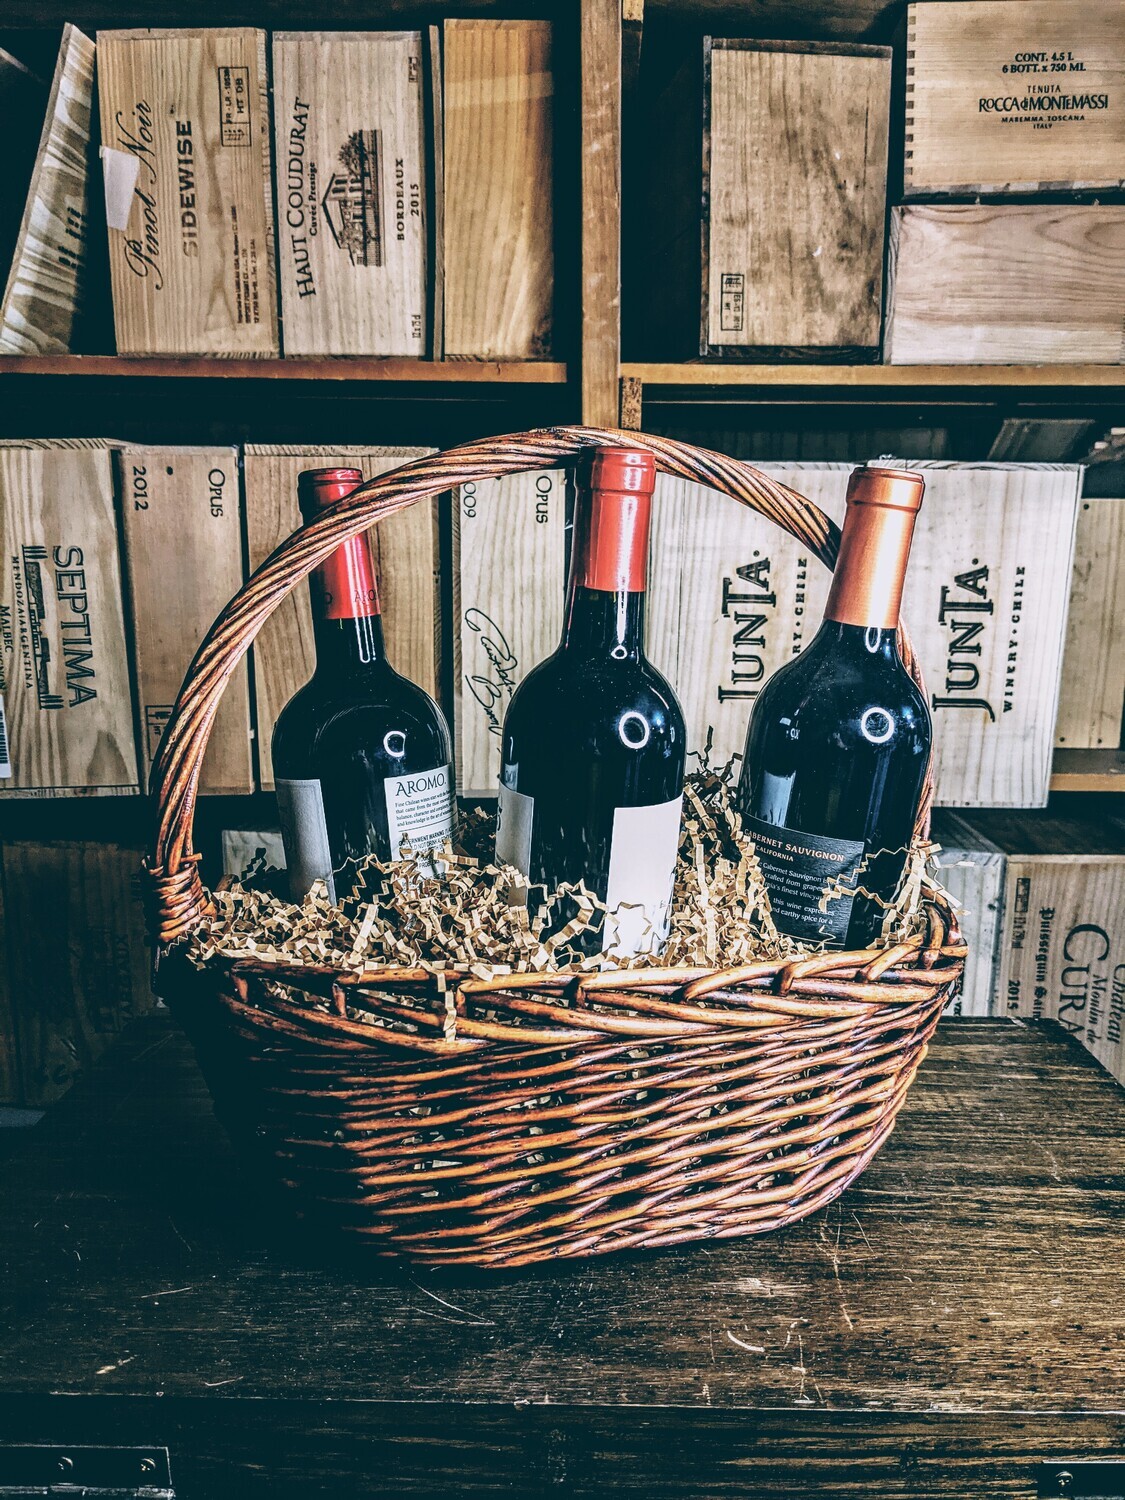 "Red Wines of the World" Wine Gift Basket